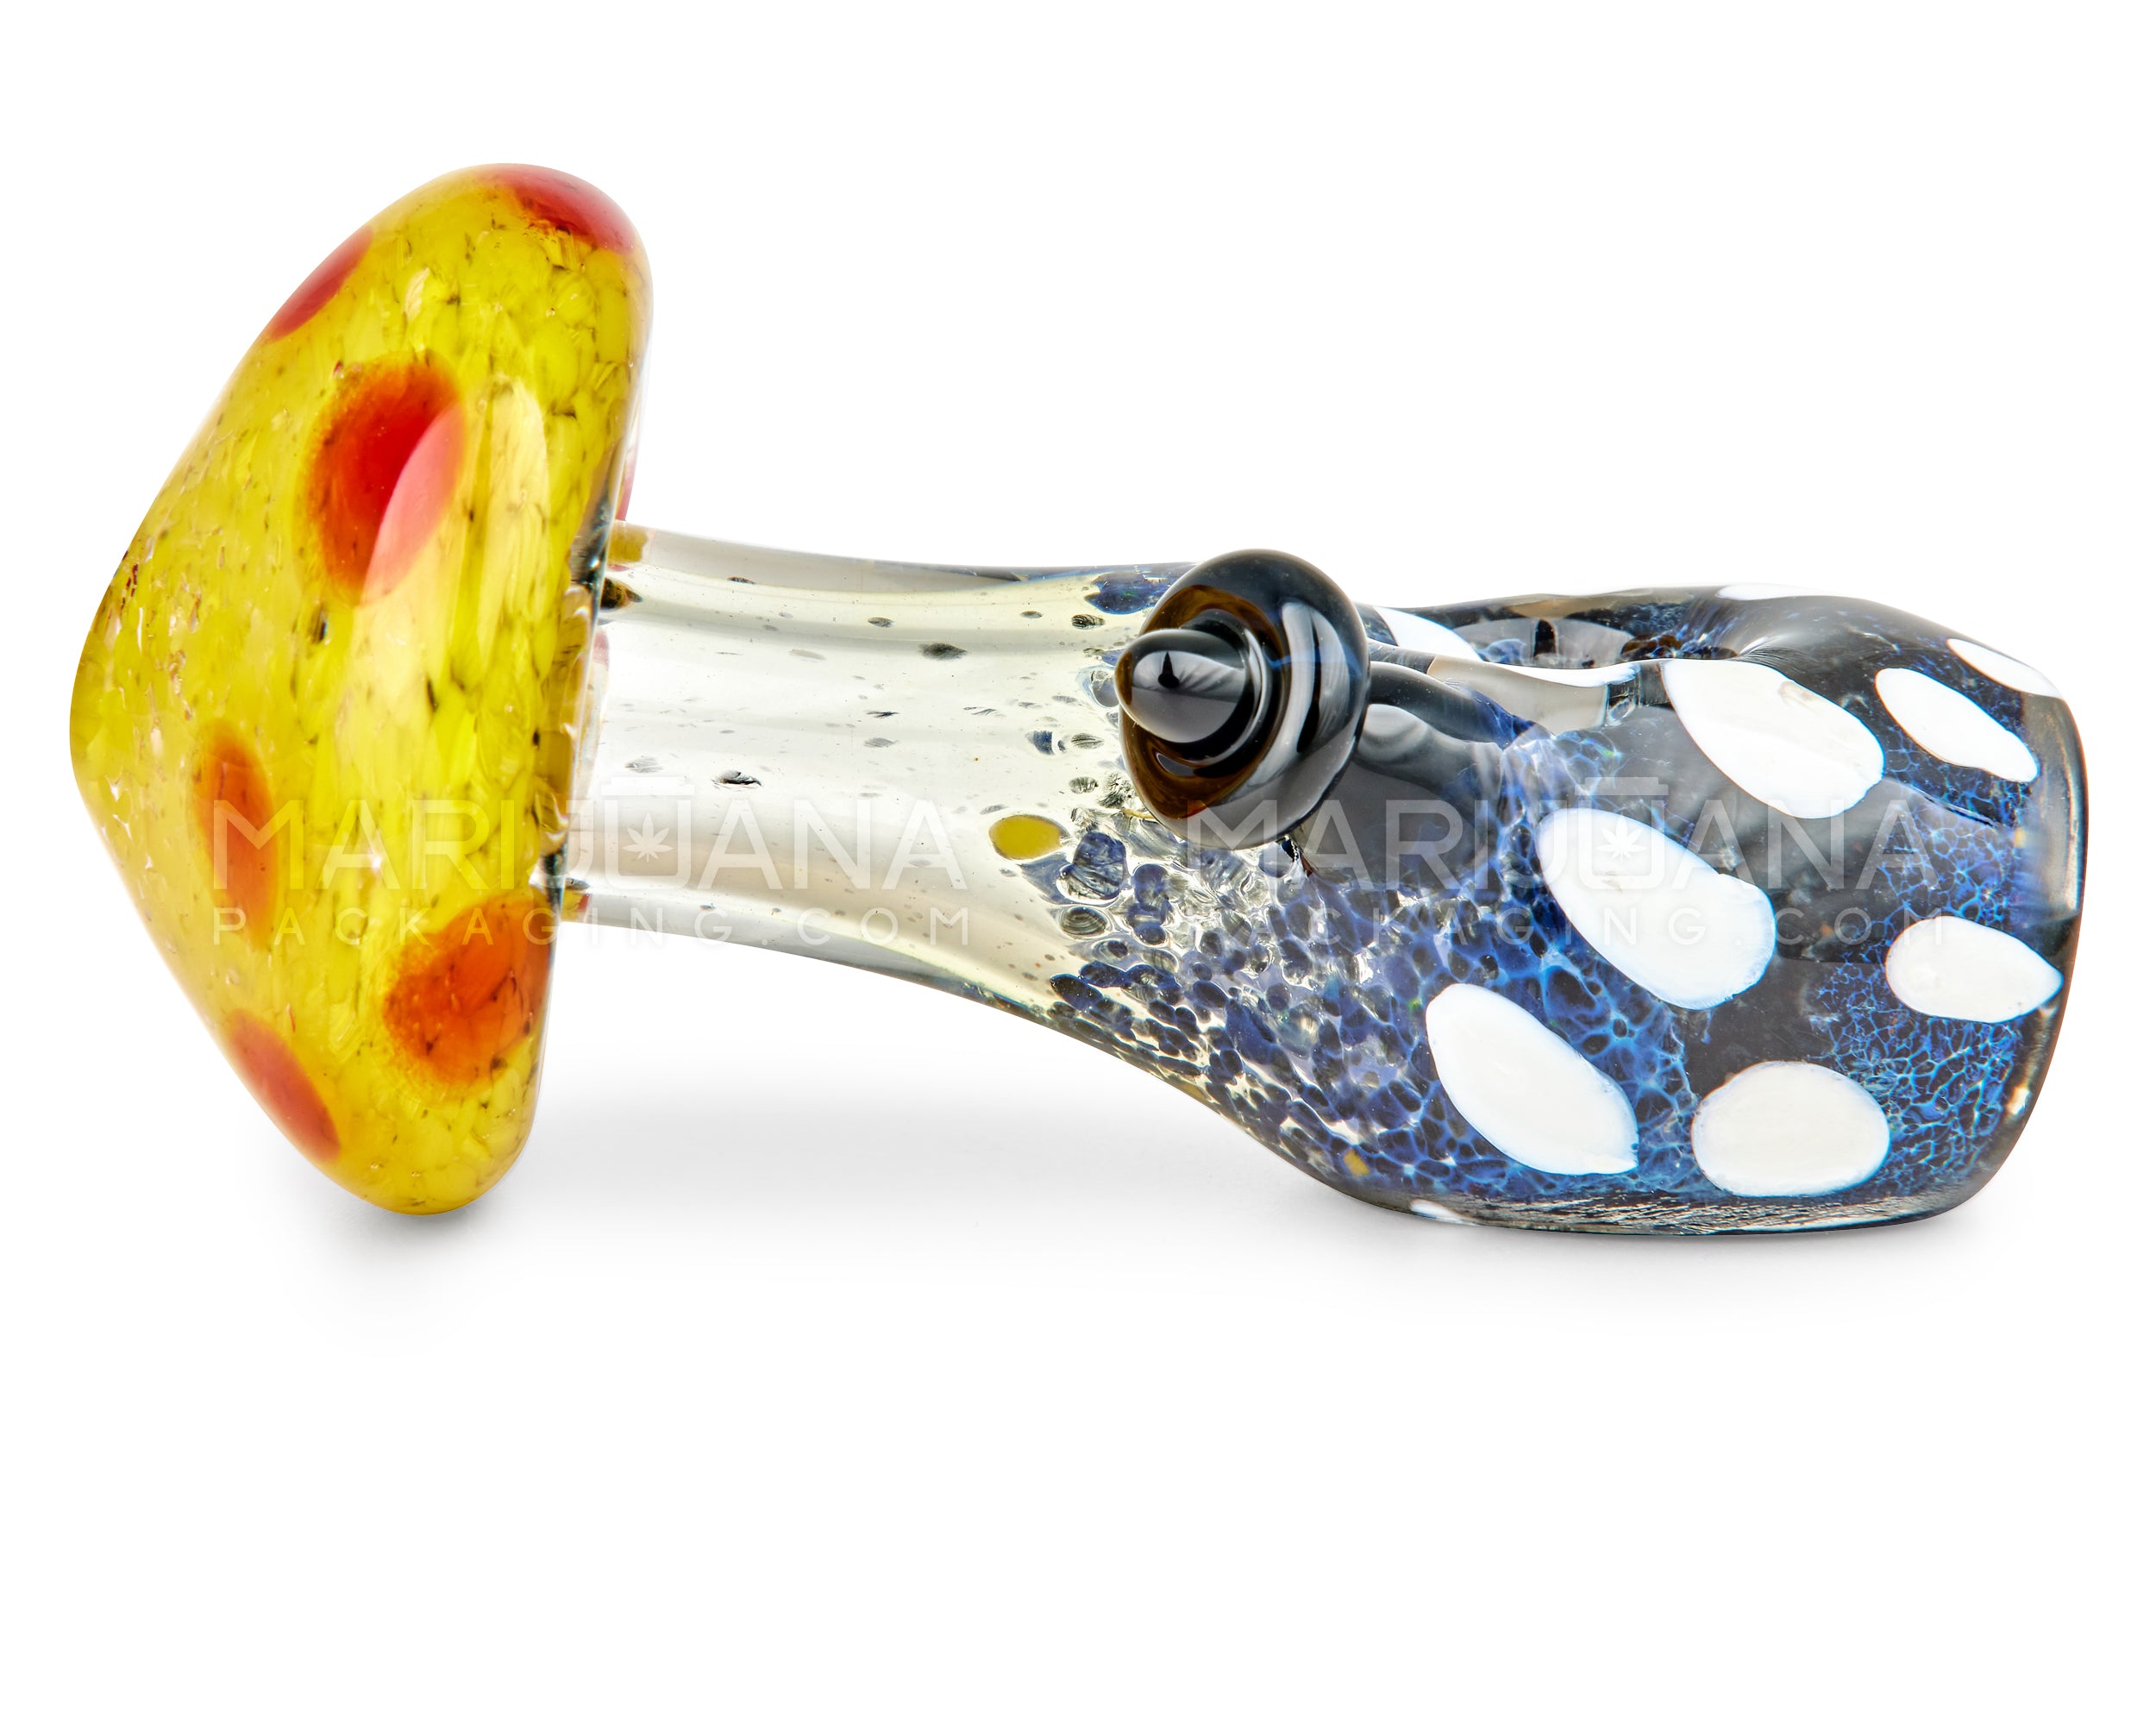 Frit & Multi Fumed Mushroom Hand Pipe w/ Ribboning & Glass Handle | 4in Long - Glass - Gold - 5